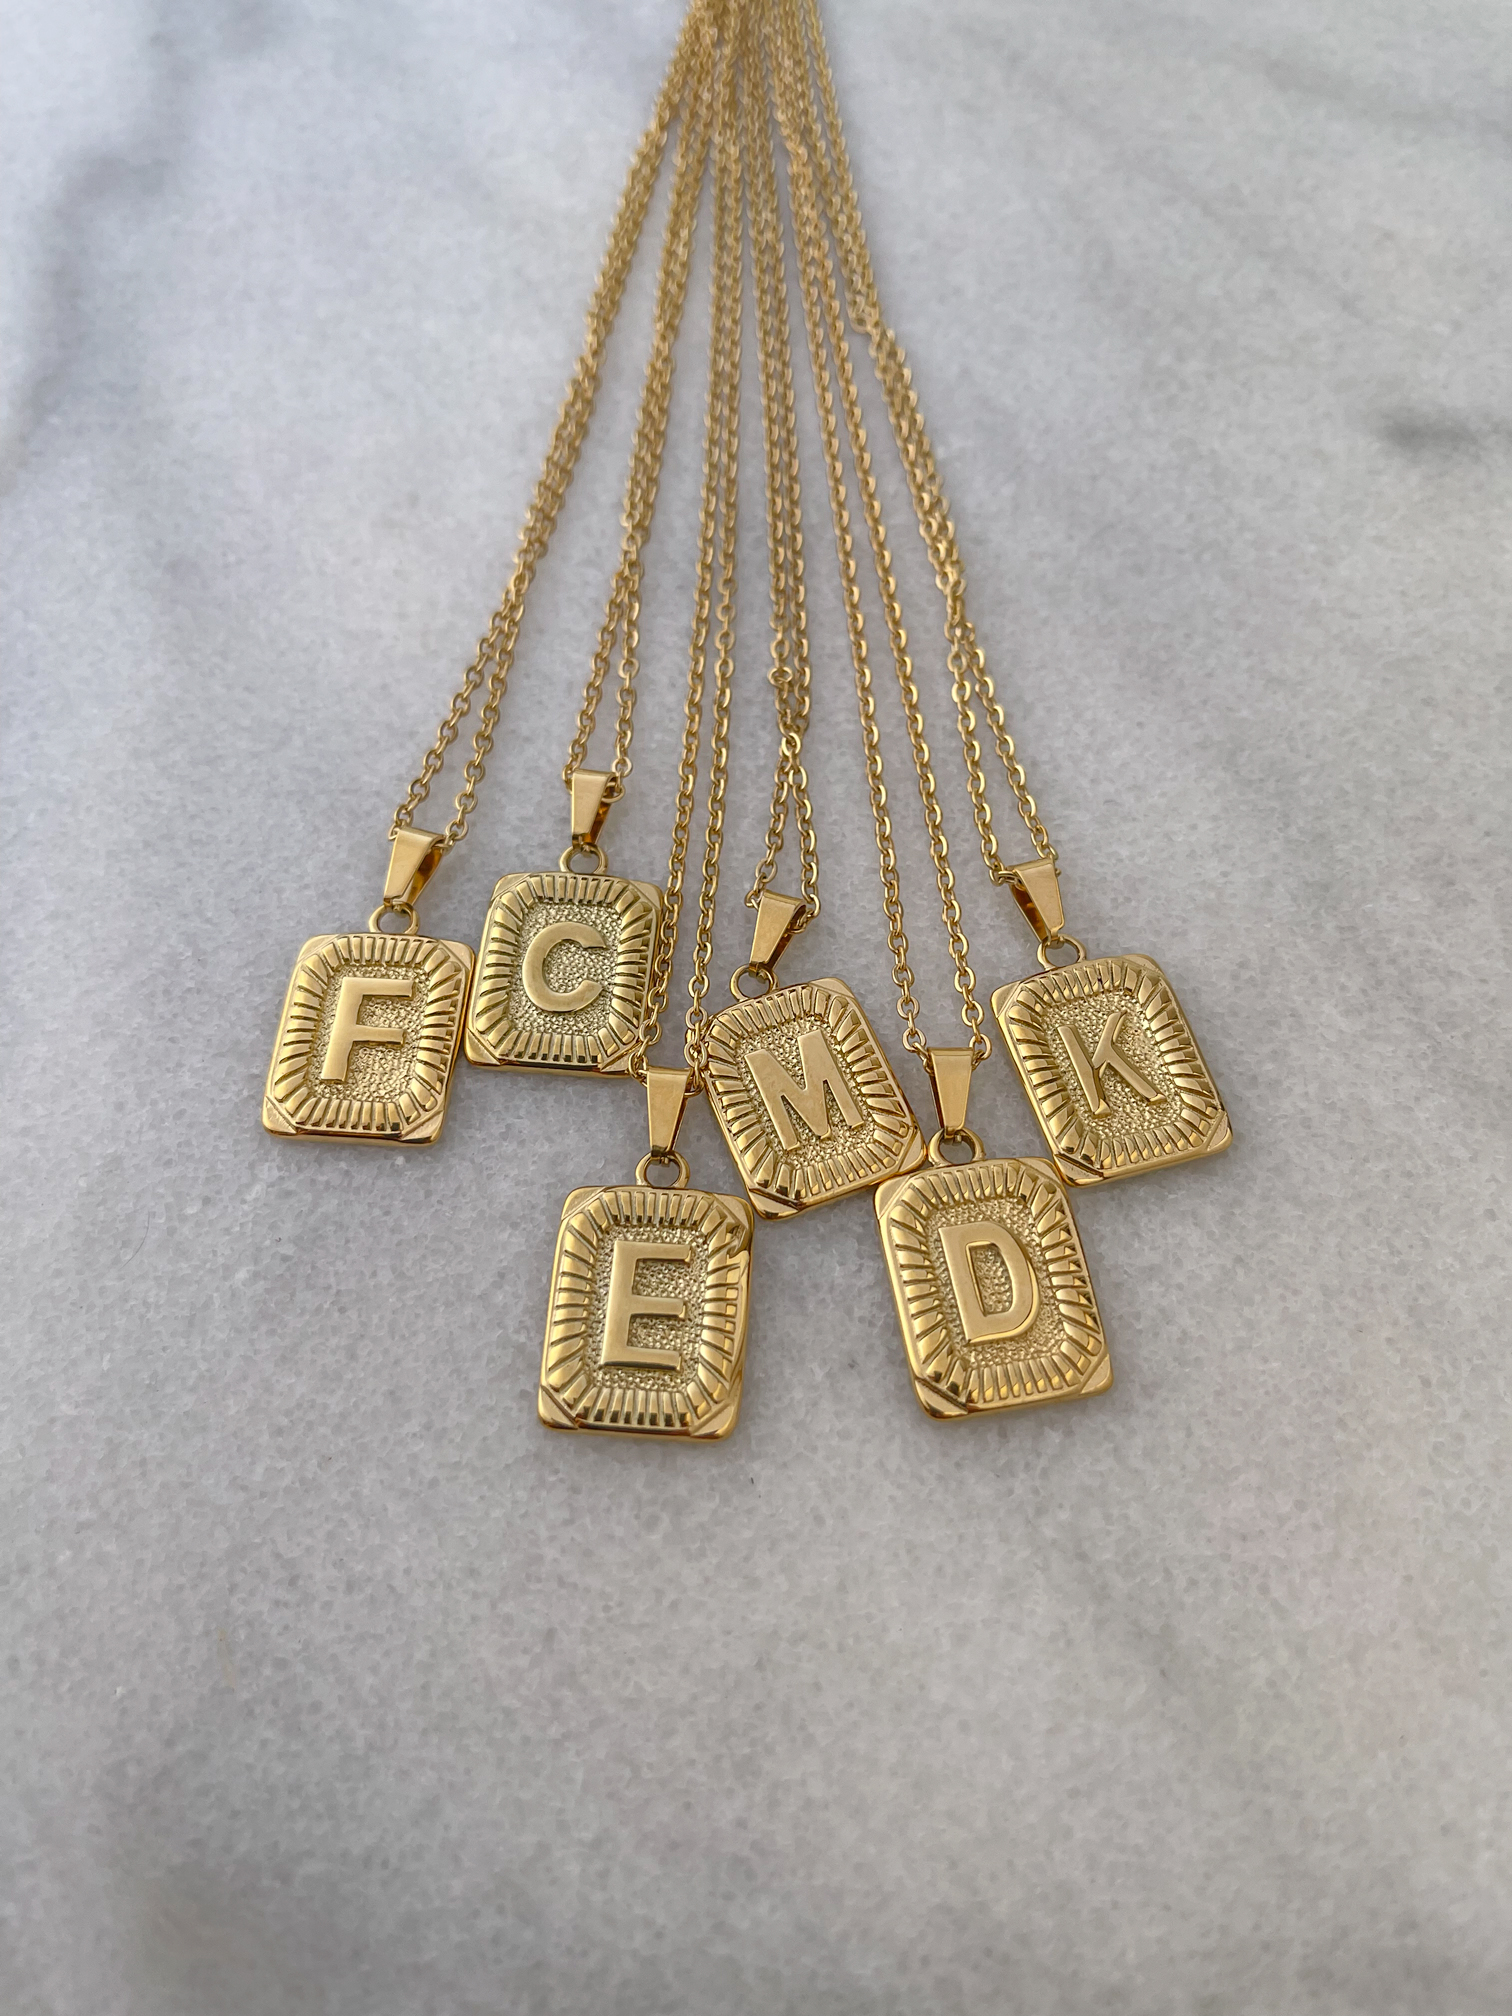 Classic initial necklaces in gold – velvet accessoriess